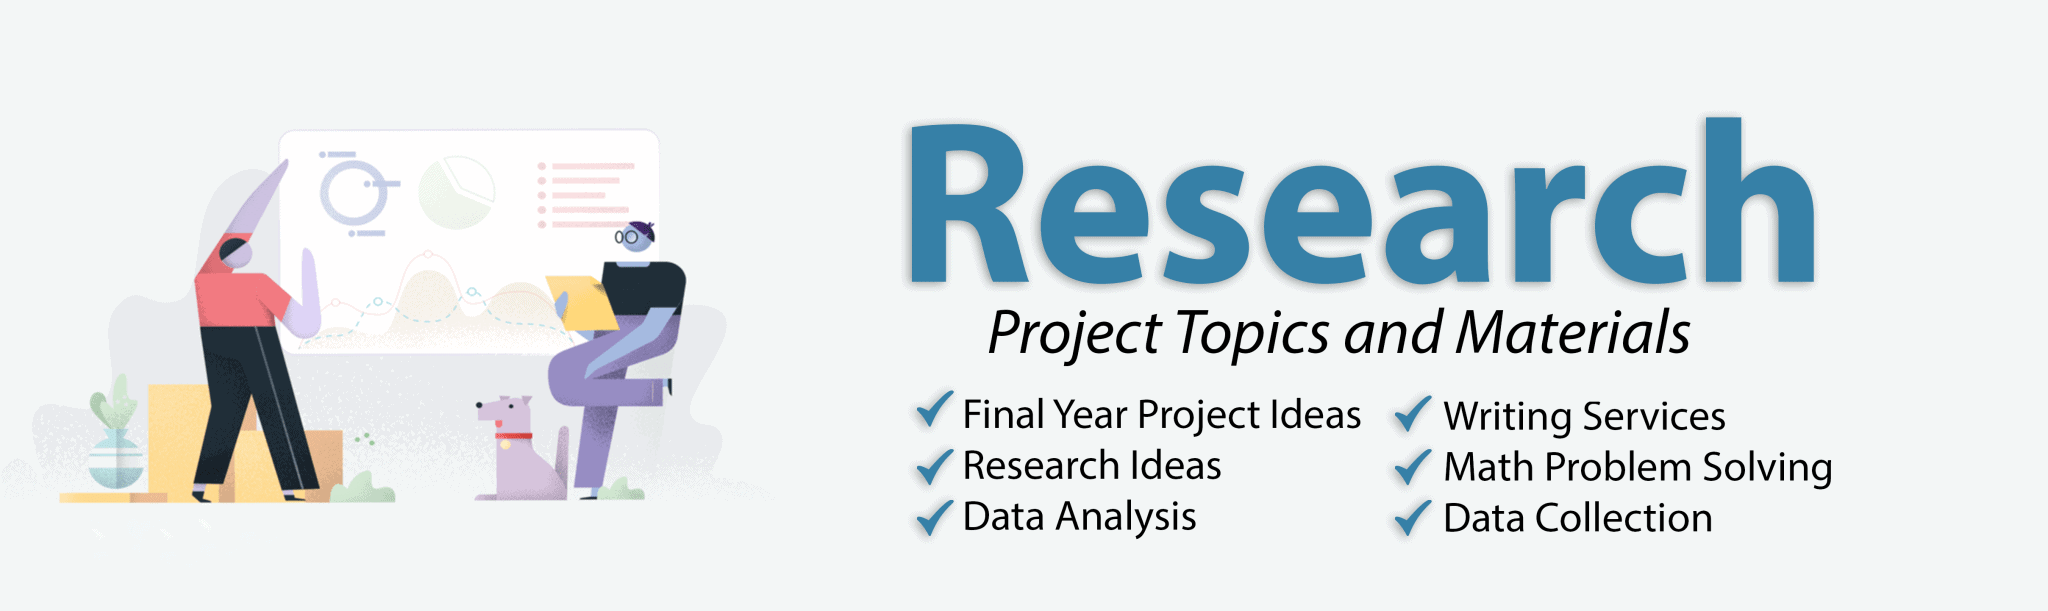 Project topics ideas for final year undergraduate student academic research projects